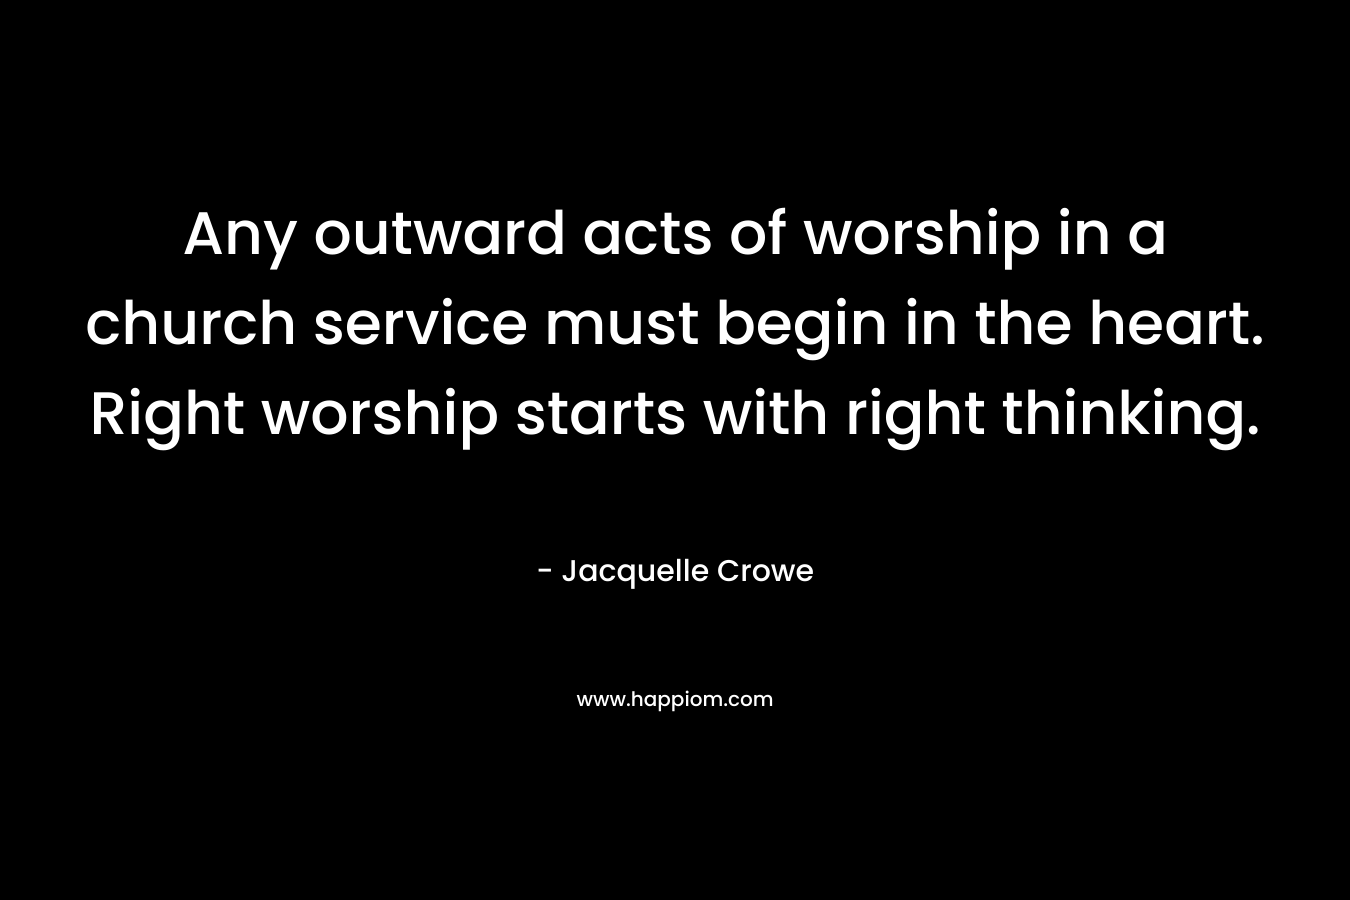 Any outward acts of worship in a church service must begin in the heart. Right worship starts with right thinking. – Jacquelle Crowe